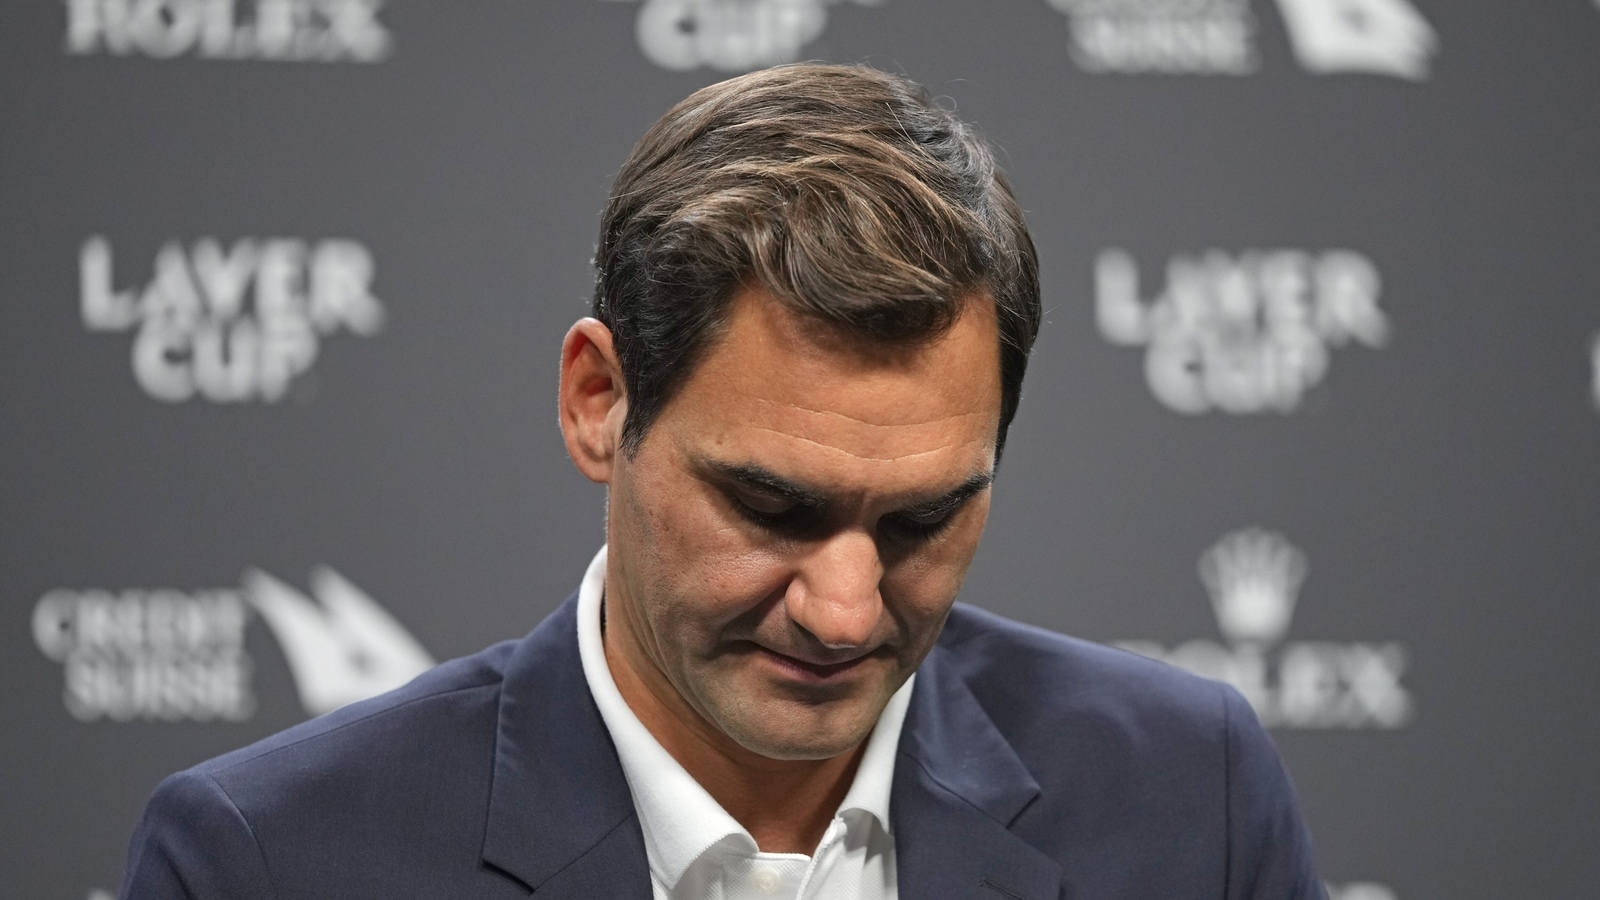 ‘Scan result wasn’t what I wanted it to be’: Roger Federer reveals painful details leading to retirement decision